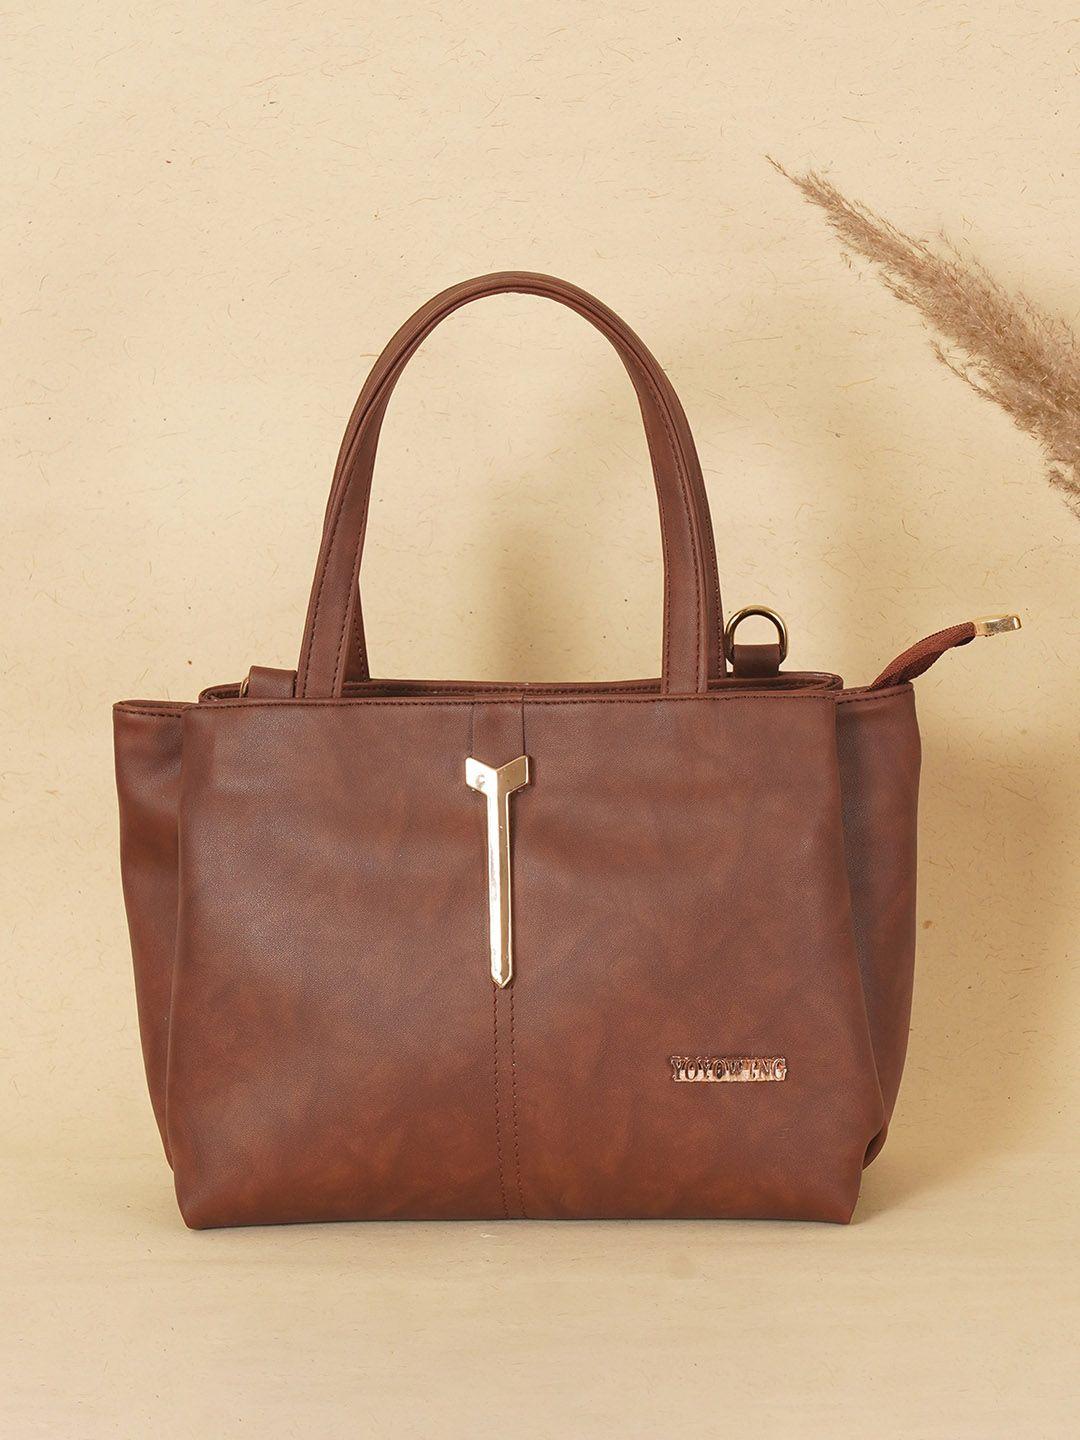 yoyowing structured shoulder bag with bow detail